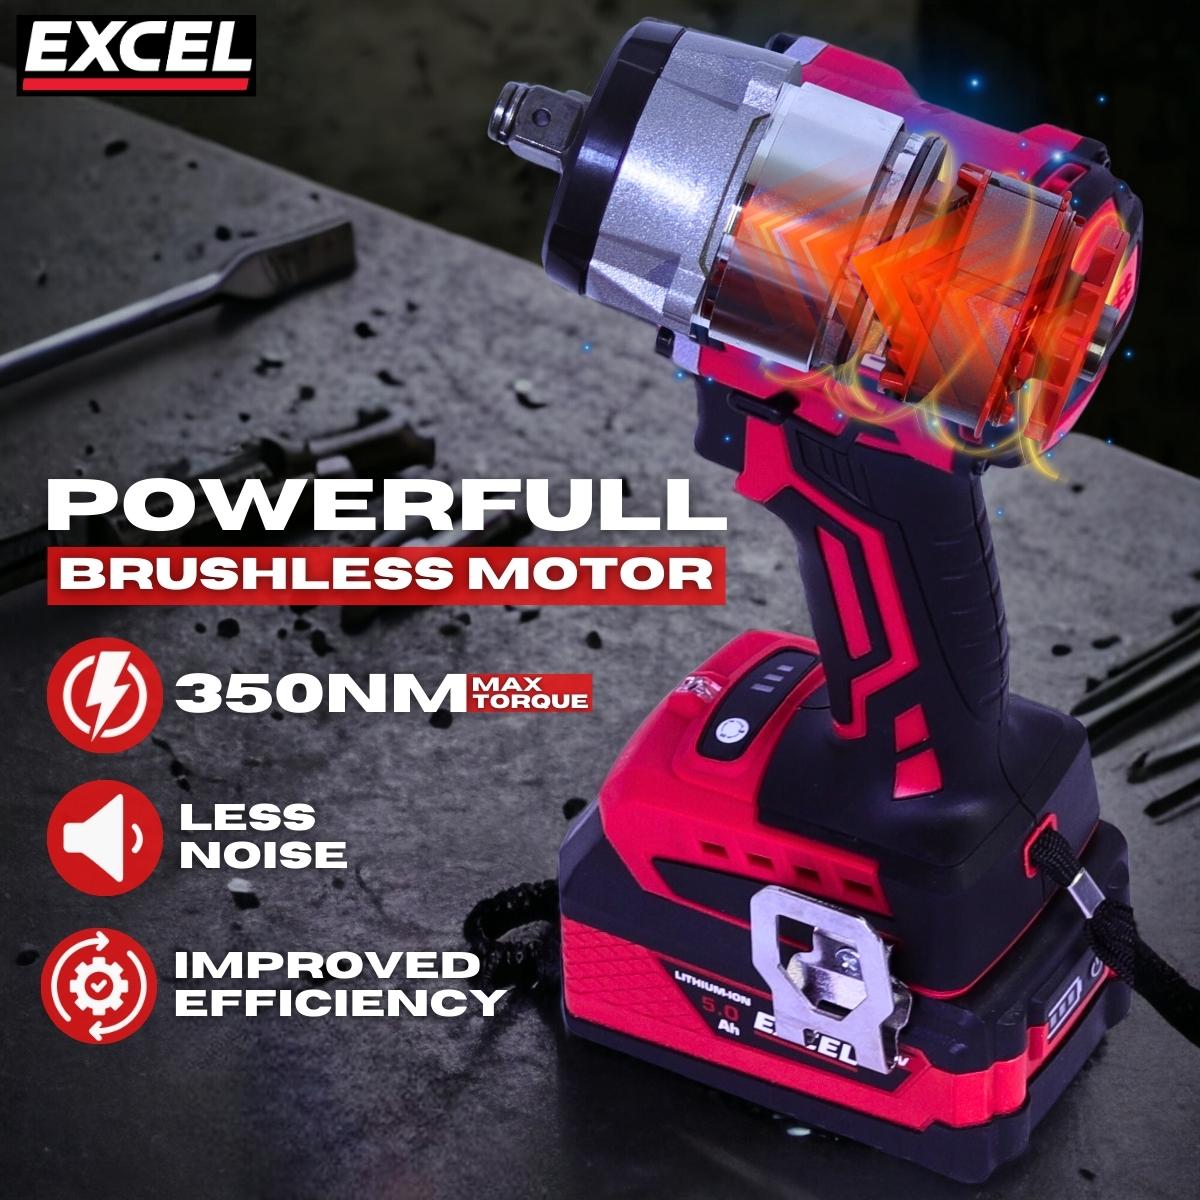 Excel 18V Cordless Brushless 1/2'' Impact Wrench with 1 x 2.0Ah Battery & Charger